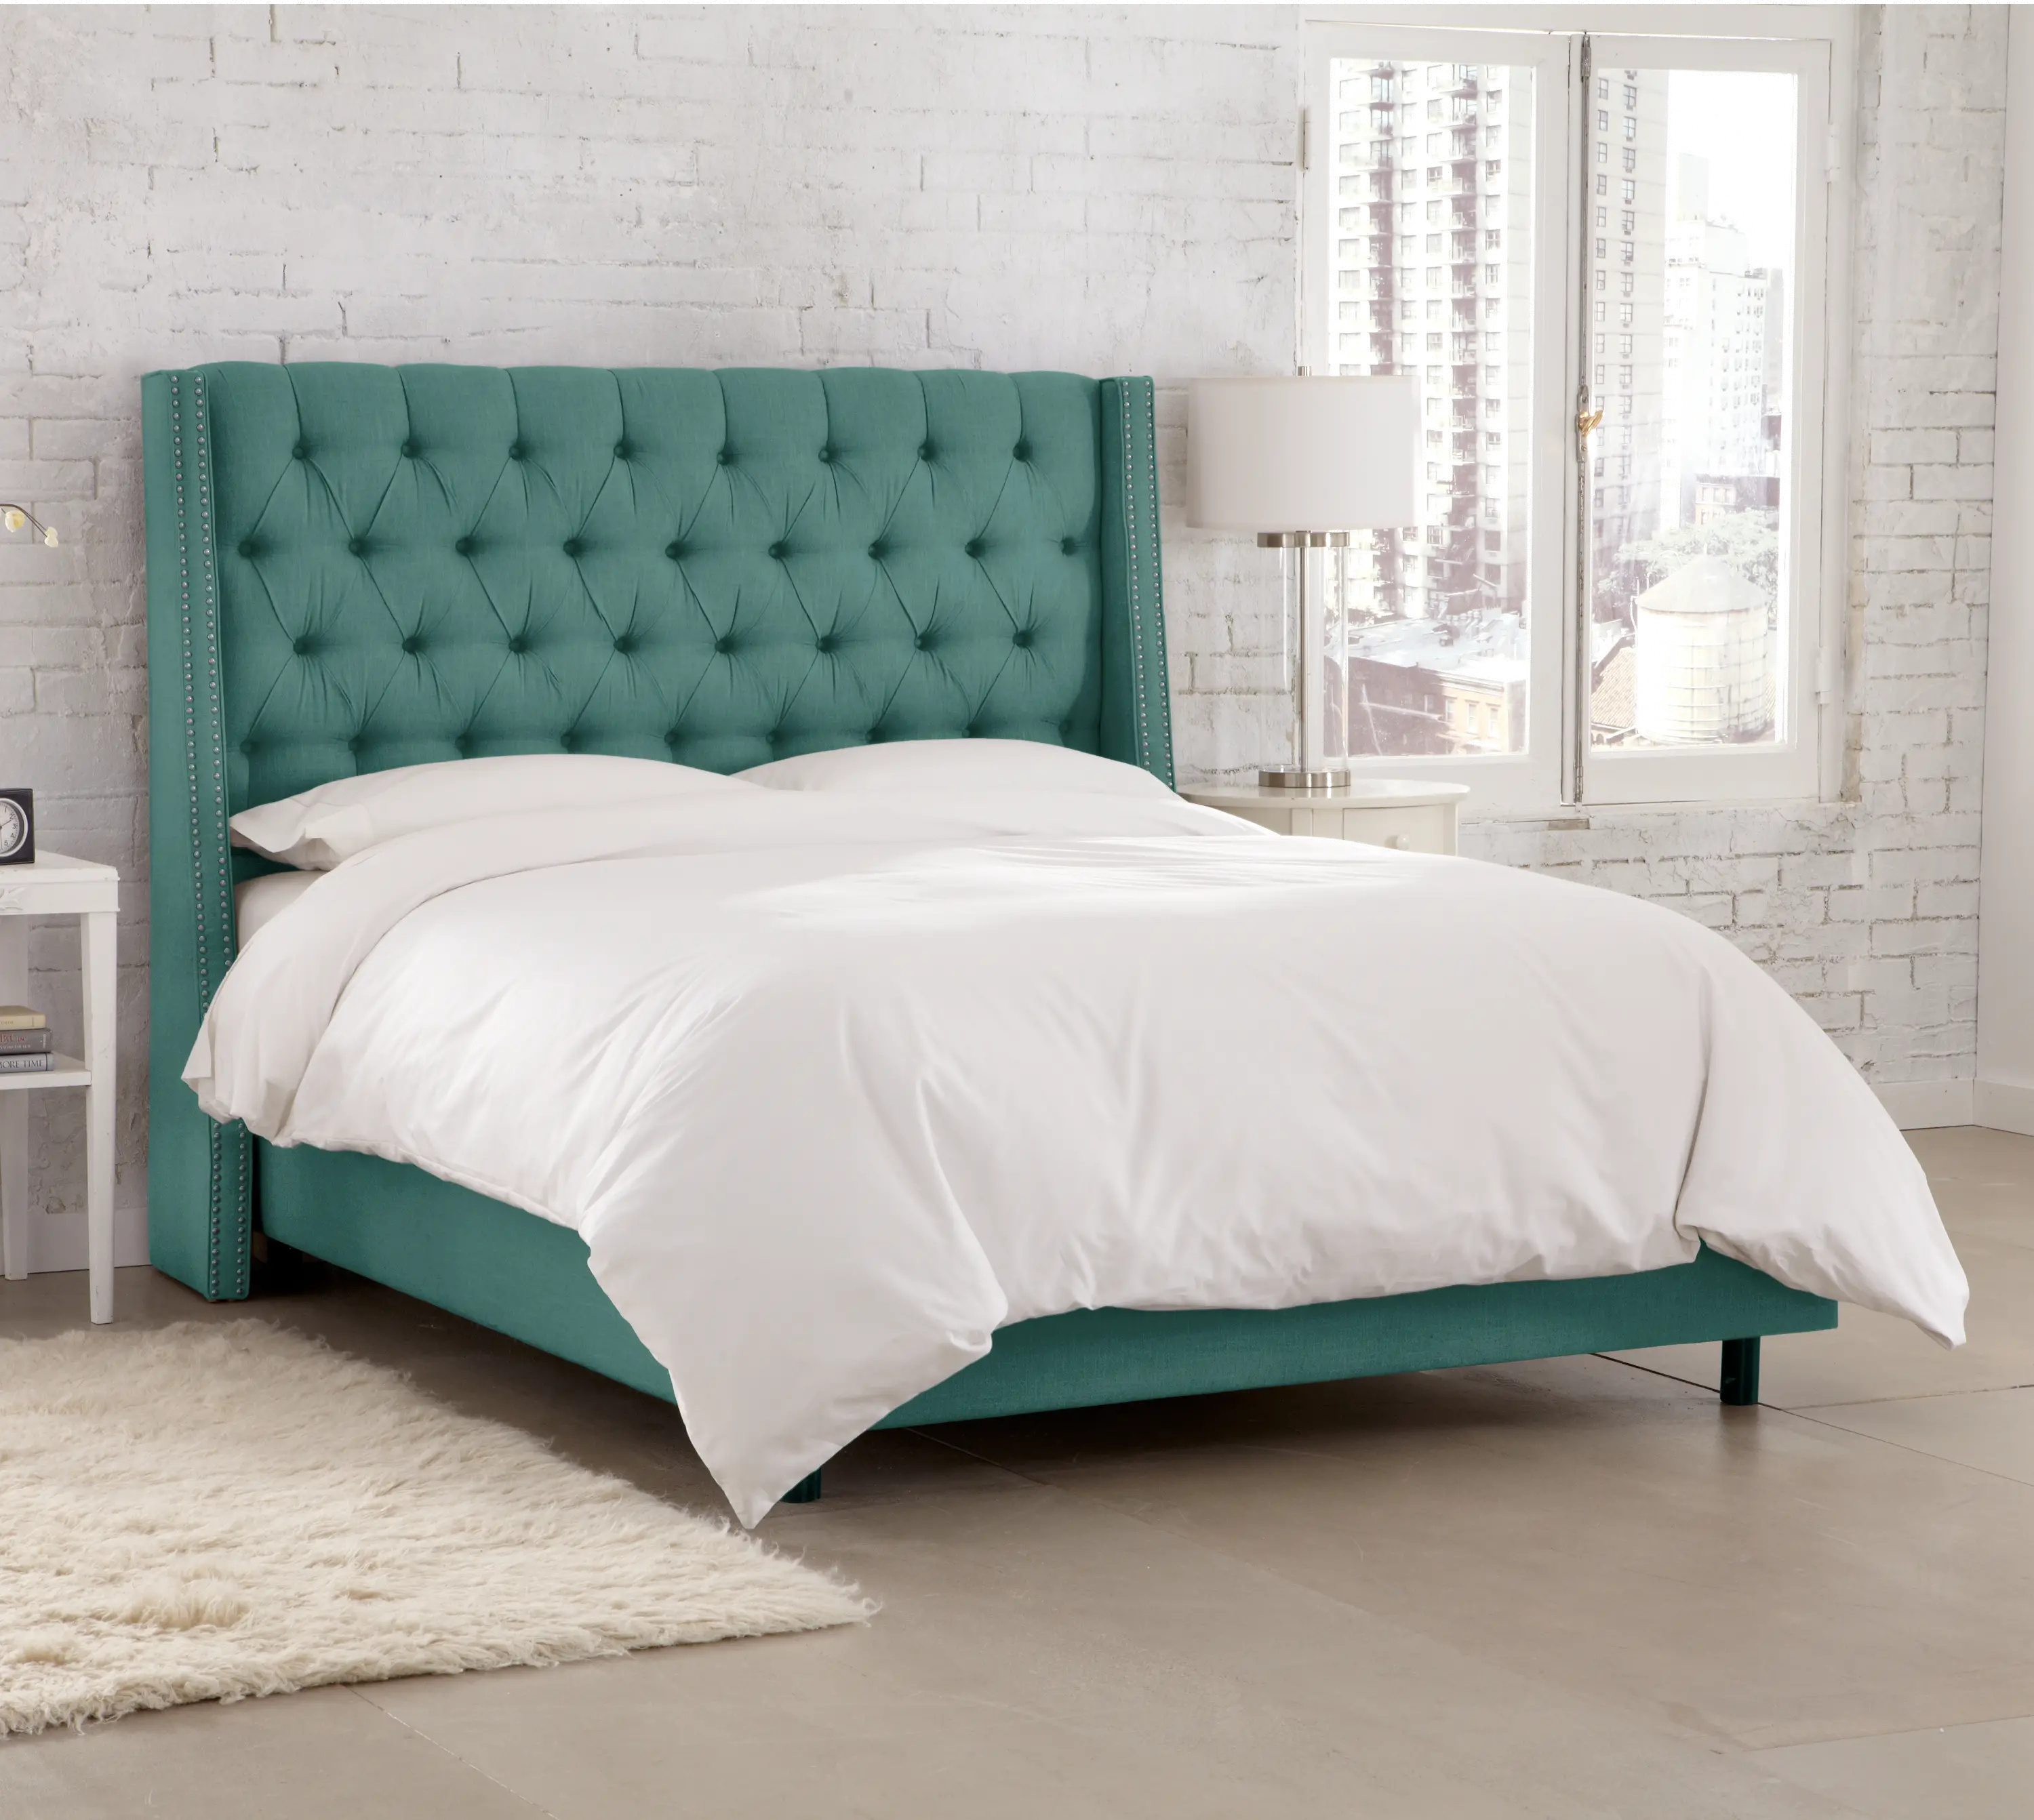 124NBBED-PWLNNLGN Riley Teal Flared Wingback California King Bed - S sku 124NBBED-PWLNNLGN